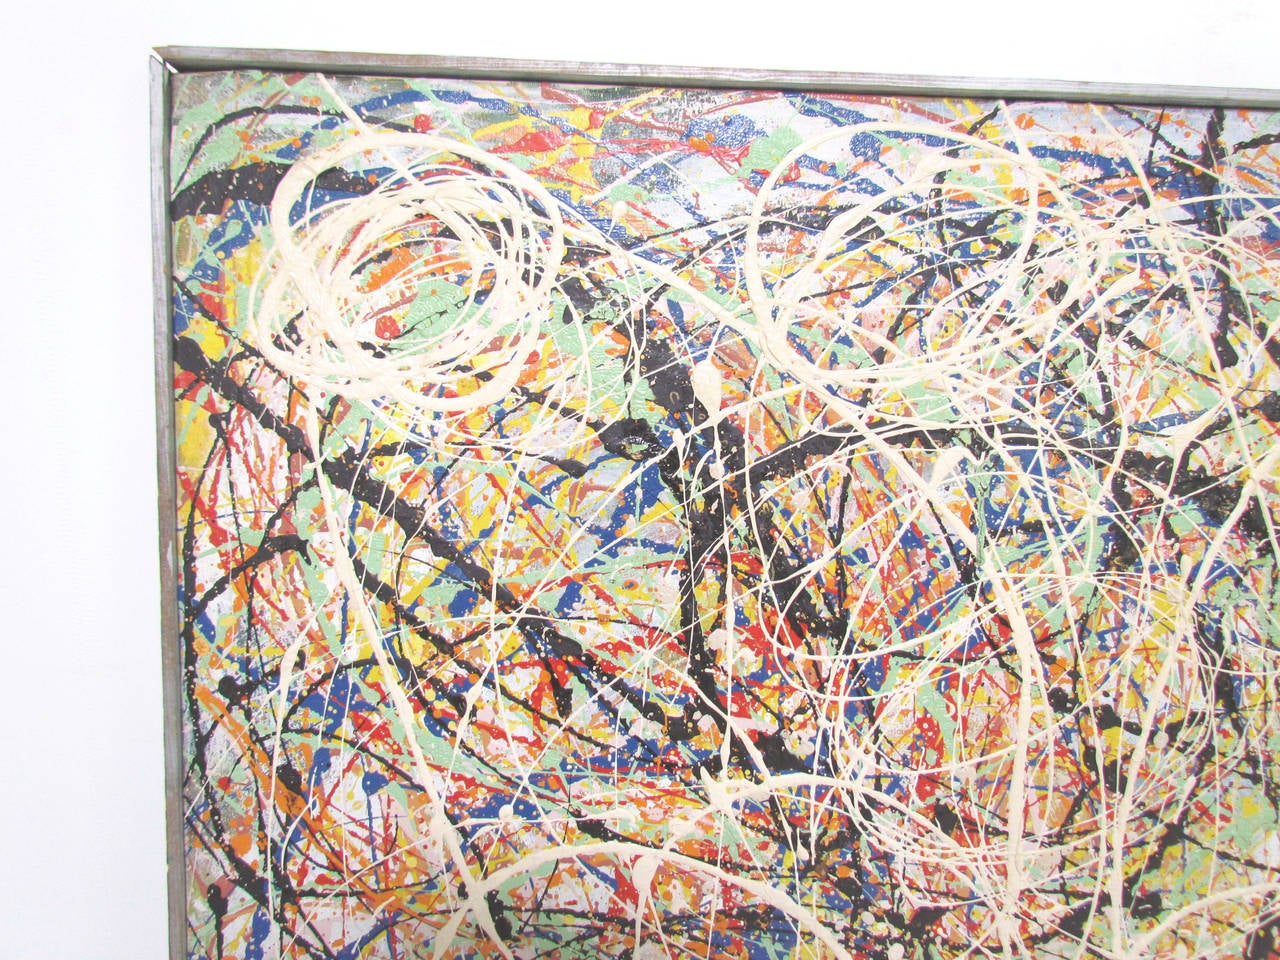 Mid-20th Century Abstract Expressionist Splatter and Drip Painting, Dated 1962